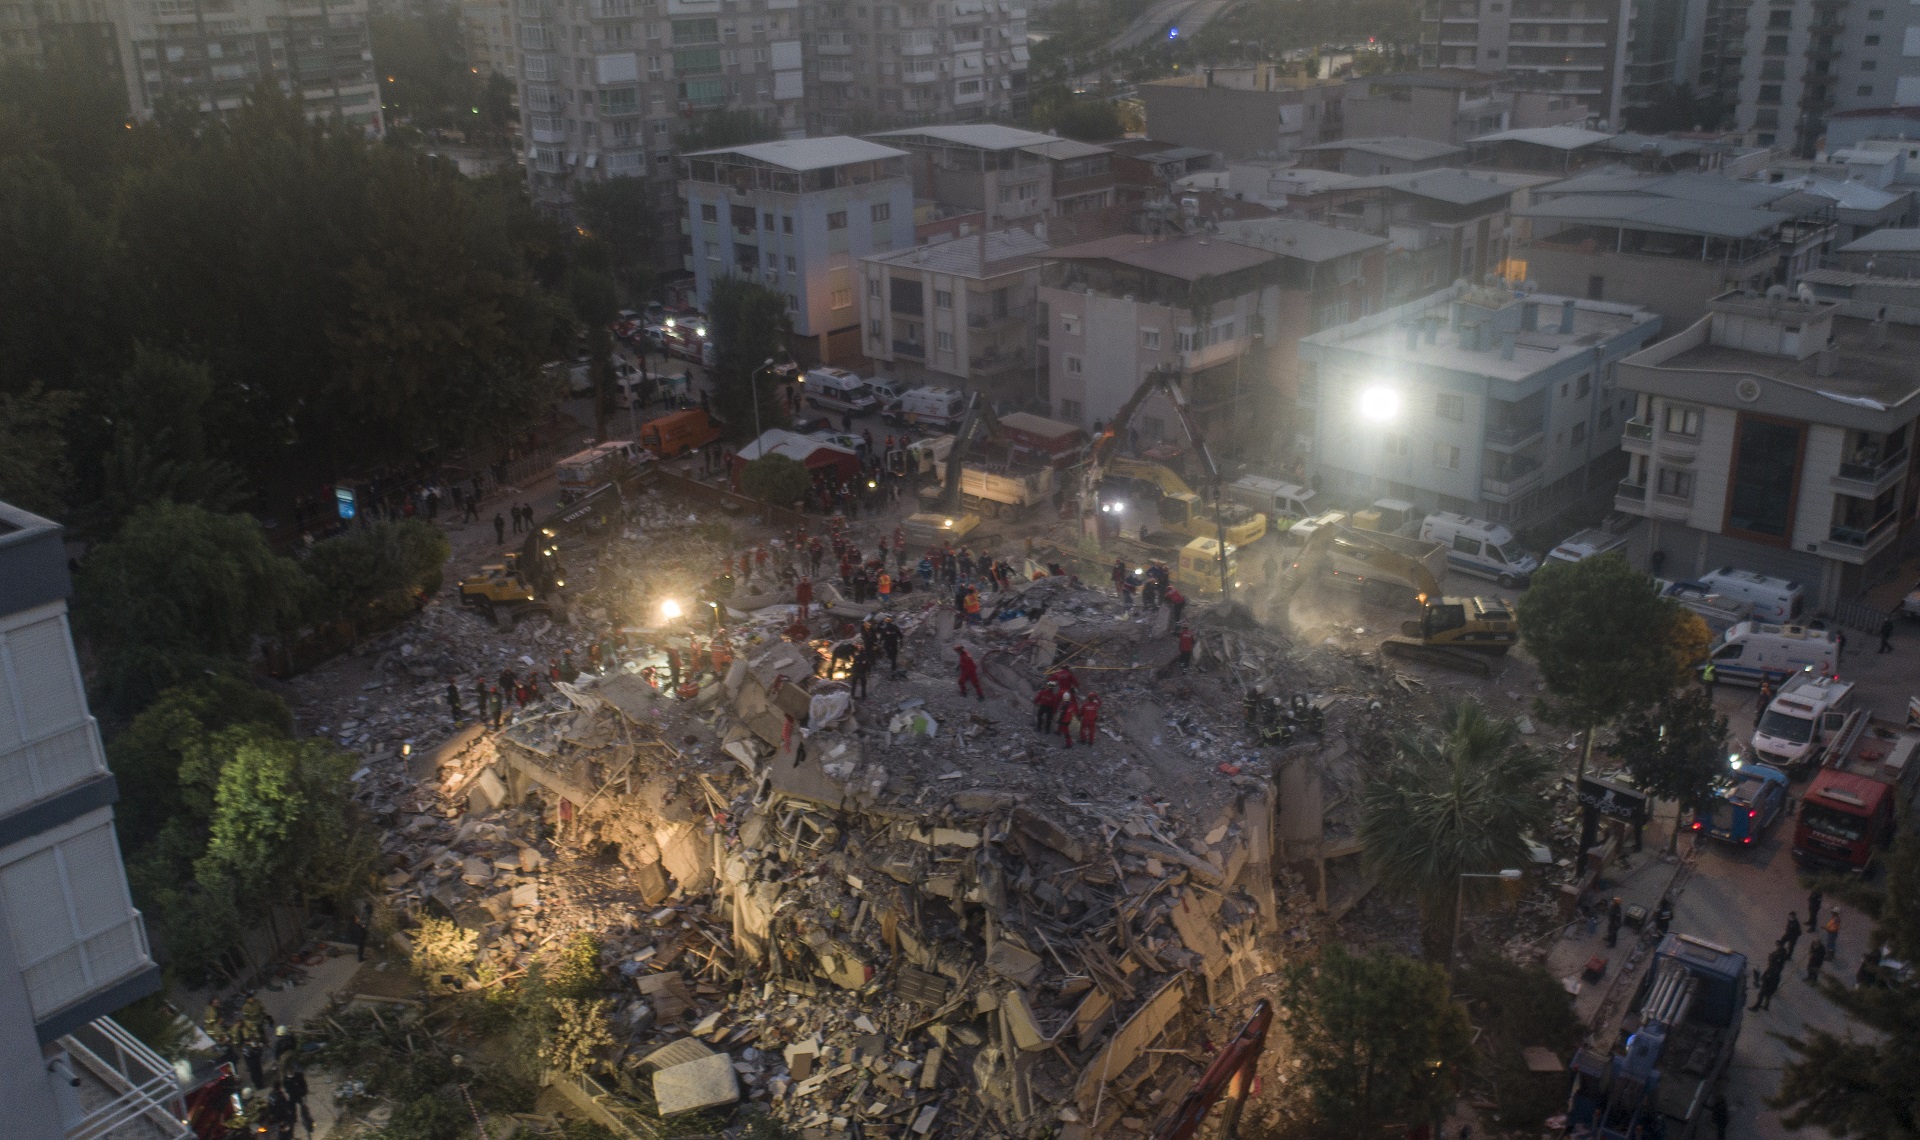 epa08787347 An aerial photo made with a drone shows rescue workers and people search for survivors at a collapsed building after a 7.0 magnitude earthquake in the Aegean Sea, at Bayrakli district in Izmir, Turkey, 31 October 2020. According to Turkish media reports, at least twenty four people died while more than eight hundred were injured and dozens of buildings were destroyed in the earthquake.  EPA/ERDEM SAHIN